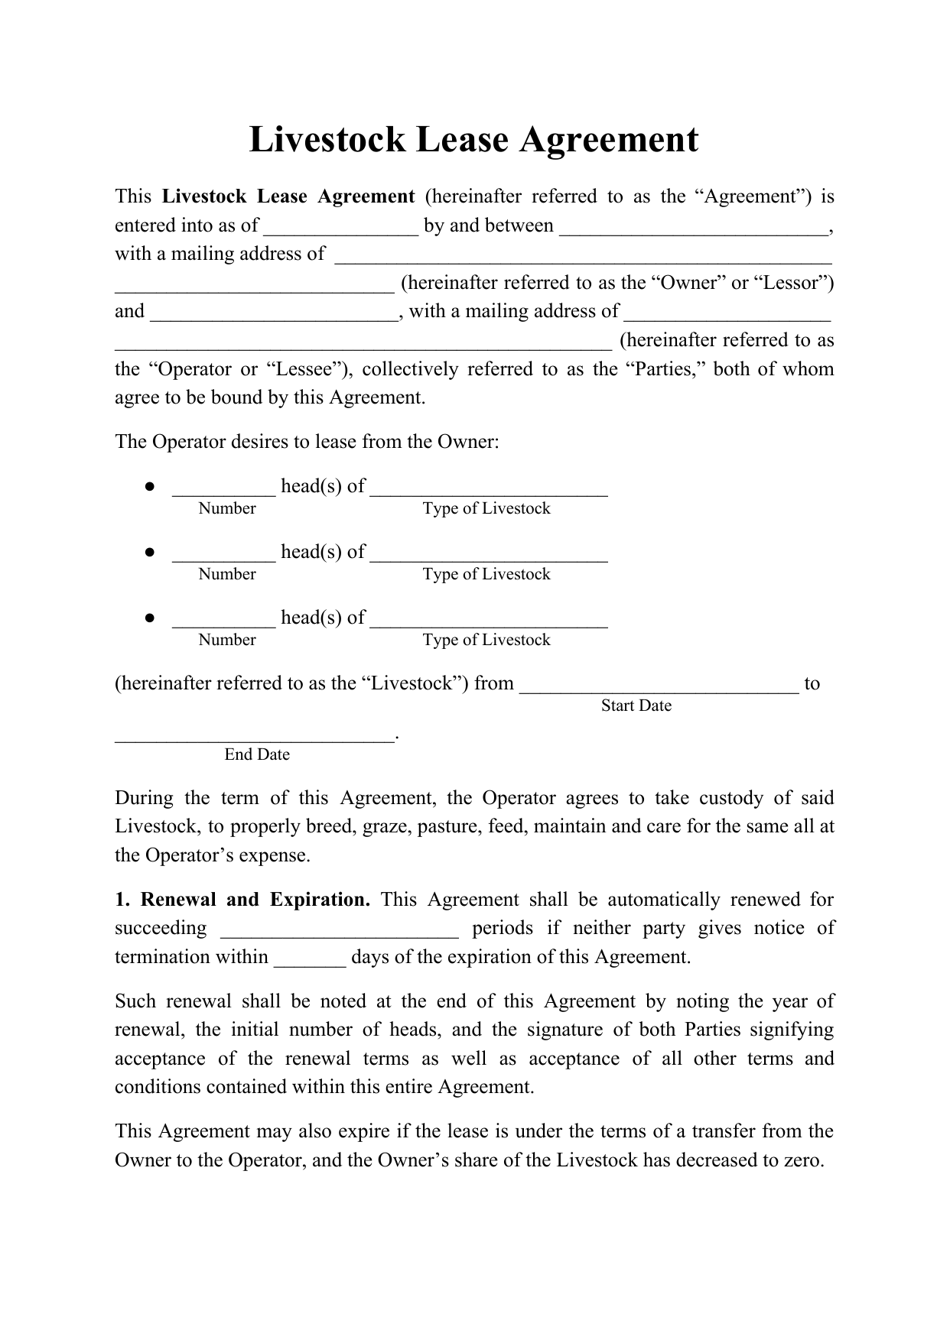 Livestock Lease Agreement Template, Page 1